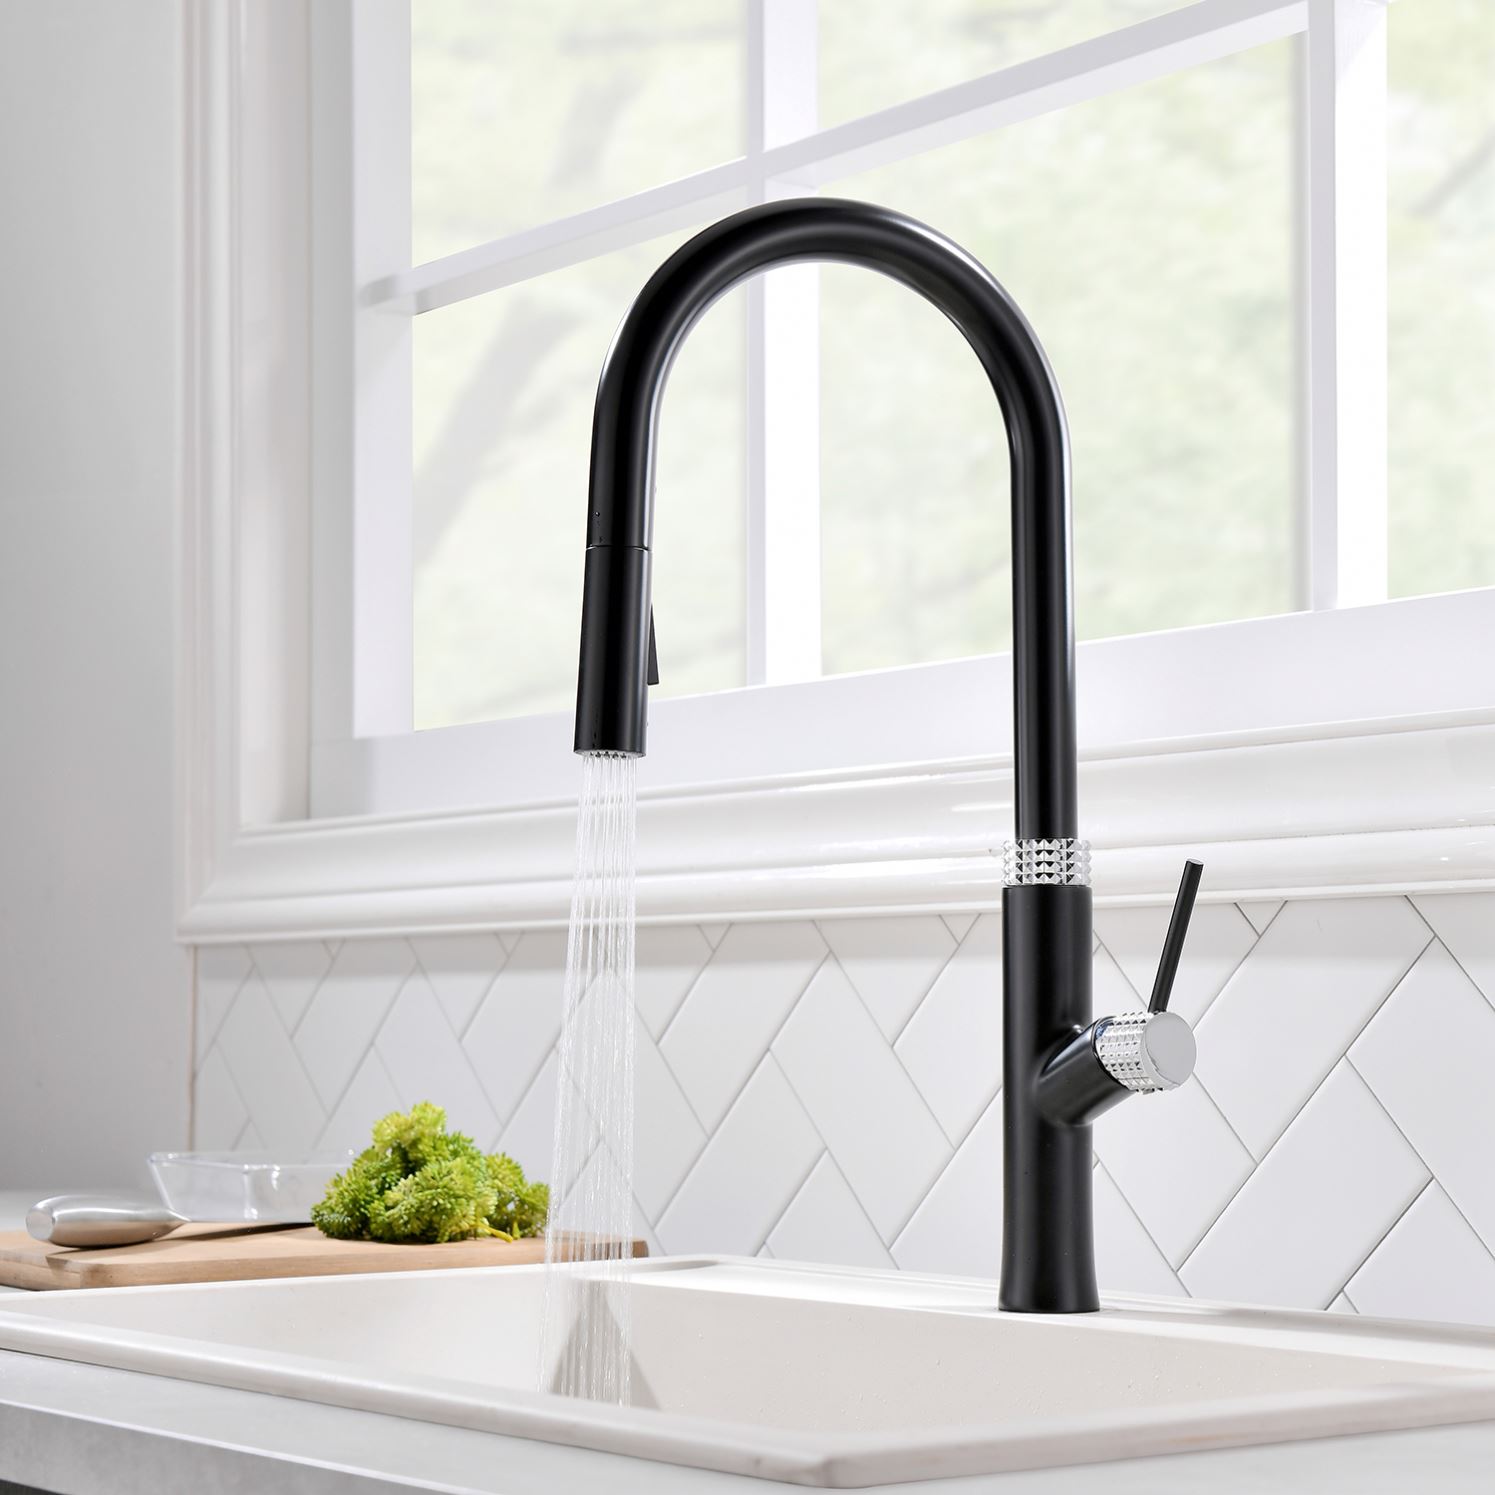 Multifunctional Black Sink Antique Faucet Kitchen Mixer With Great Price